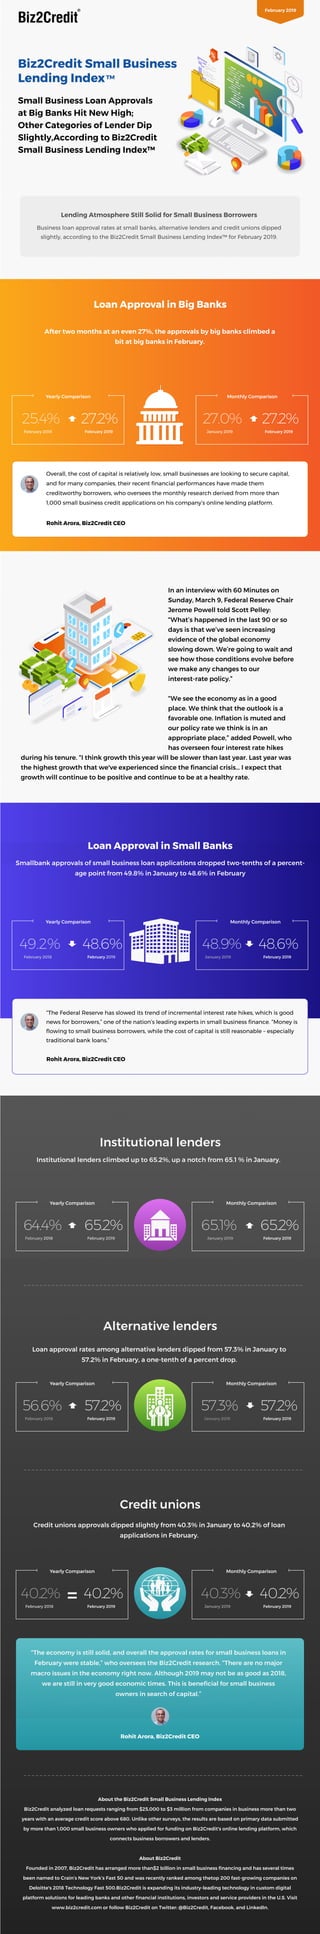 Loan Approval in Big Banks
February 2018 February 2019
Yearly Comparison Monthly Comparison
25.4% 27.2%
during his tenure. “I think growth this year will be slower than last year. Last year was
the highest growth that we've experienced since the ﬁnancial crisis… I expect that
growth will continue to be positive and continue to be at a healthy rate.
Lending Atmosphere Still Solid for Small Business Borrowers
Biz2Credit Small Business
Lending IndexTM
January 2019 February 2019
27.0% 27.2%
Rohit Arora, Biz2Credit CEO
Loan Approval in Small Banks
February 2018 February 2019
Yearly Comparison Monthly Comparison
49.2% 48.6%
January 2019 February 2019
48.9% 48.6%
Rohit Arora, Biz2Credit CEO
Institutional lenders
February 2018 February 2019
Yearly Comparison Monthly Comparison
64.4% 65.2%
January 2019 February 2019
65.1% 65.2%
Credit unions
Credit unions approvals dipped slightly from 40.3% in January to 40.2% of loan
applications in February.
Rohit Arora, Biz2Credit CEO
February 2018 February 2019
Yearly Comparison Monthly Comparison
40.2% 40.2%
January 2019 February 2019
40.3% 40.2%
Alternative lenders
Loan approval rates among alternative lenders dipped from 57.3% in January to
57.2% in February, a one-tenth of a percent drop.
February 2018 February 2019
Yearly Comparison Monthly Comparison
56.6% 57.2%
January 2019 February 2019
57.3% 57.2%
Small Business Loan Approvals
at Big Banks Hit New High;
Other Categories of Lender Dip
Slightly,According to Biz2Credit
Small Business Lending Index™
Overall, the cost of capital is relatively low, small businesses are looking to secure capital,
and for many companies, their recent ﬁnancial performances have made them
creditworthy borrowers, who oversees the monthly research derived from more than
1,000 small business credit applications on his company’s online lending platform.
“The Federal Reserve has slowed its trend of incremental interest rate hikes, which is good
news for borrowers,” one of the nation’s leading experts in small business ﬁnance. “Money is
ﬂowing to small business borrowers, while the cost of capital is still reasonable – especially
traditional bank loans.”
February 2019
In an interview with 60 Minutes on
Sunday, March 9, Federal Reserve Chair
Jerome Powell told Scott Pelley:
“What’s happened in the last 90 or so
days is that we’ve seen increasing
evidence of the global economy
slowing down. We’re going to wait and
see how those conditions evolve before
we make any changes to our
interest-rate policy.”
“We see the economy as in a good
place. We think that the outlook is a
favorable one. Inﬂation is muted and
our policy rate we think is in an
appropriate place,” added Powell, who
has overseen four interest rate hikes
Smallbank approvals of small business loan applications dropped two-tenths of a percent-
age point from 49.8% in January to 48.6% in February
Institutional lenders climbed up to 65.2%, up a notch from 65.1 % in January.
“The economy is still solid, and overall the approval rates for small business loans in
February were stable,” who oversees the Biz2Credit research. “There are no major
macro issues in the economy right now. Although 2019 may not be as good as 2018,
we are still in very good economic times. This is beneﬁcial for small business
owners in search of capital.”
About the Biz2Credit Small Business Lending Index
Biz2Credit analyzed loan requests ranging from $25,000 to $3 million from companies in business more than two
years with an average credit score above 680. Unlike other surveys, the results are based on primary data submitted
by more than 1,000 small business owners who applied for funding on Biz2Credit's online lending platform, which
connects business borrowers and lenders.
About Biz2Credit
Founded in 2007, Biz2Credit has arranged more than$2 billion in small business ﬁnancing and has several times
been named to Crain’s New York’s Fast 50 and was recently ranked among thetop 200 fast-growing companies on
Deloitte's 2018 Technology Fast 500.Biz2Credit is expanding its industry-leading technology in custom digital
platform solutions for leading banks and other ﬁnancial institutions, investors and service providers in the U.S. Visit
www.biz2credit.com or follow Biz2Credit on Twitter: @Biz2Credit, Facebook, and LinkedIn.
Business loan approval rates at small banks, alternative lenders and credit unions dipped
slightly, according to the Biz2Credit Small Business Lending Index™ for February 2019.
After two months at an even 27%, the approvals by big banks climbed a
bit at big banks in February.
 